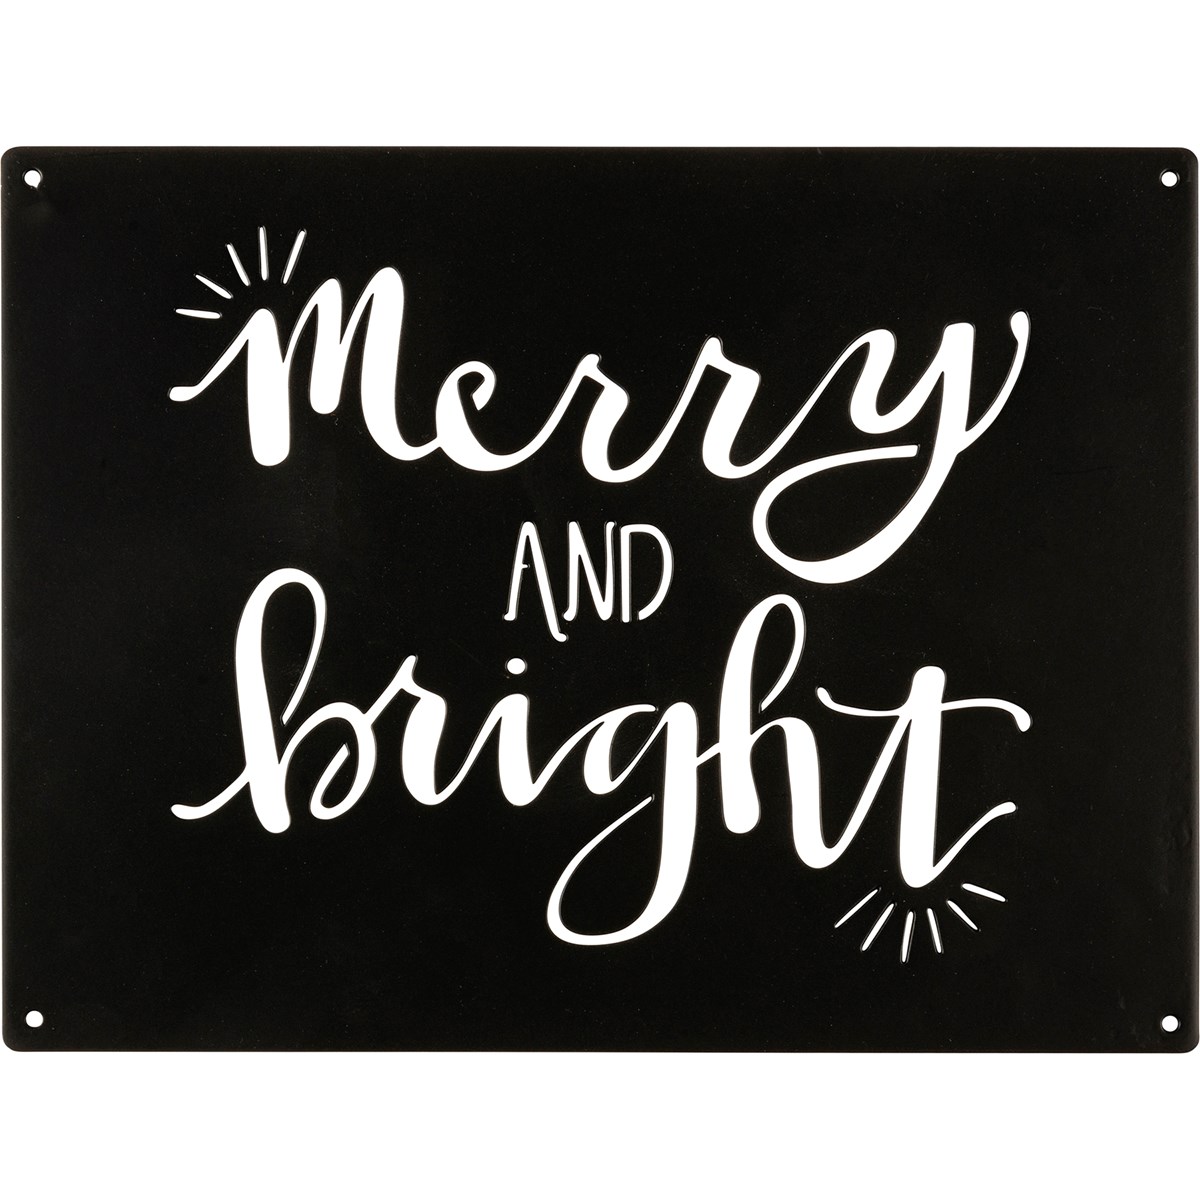 Metal Wall Art - Merry And Bright - 8" x 6" - Metal